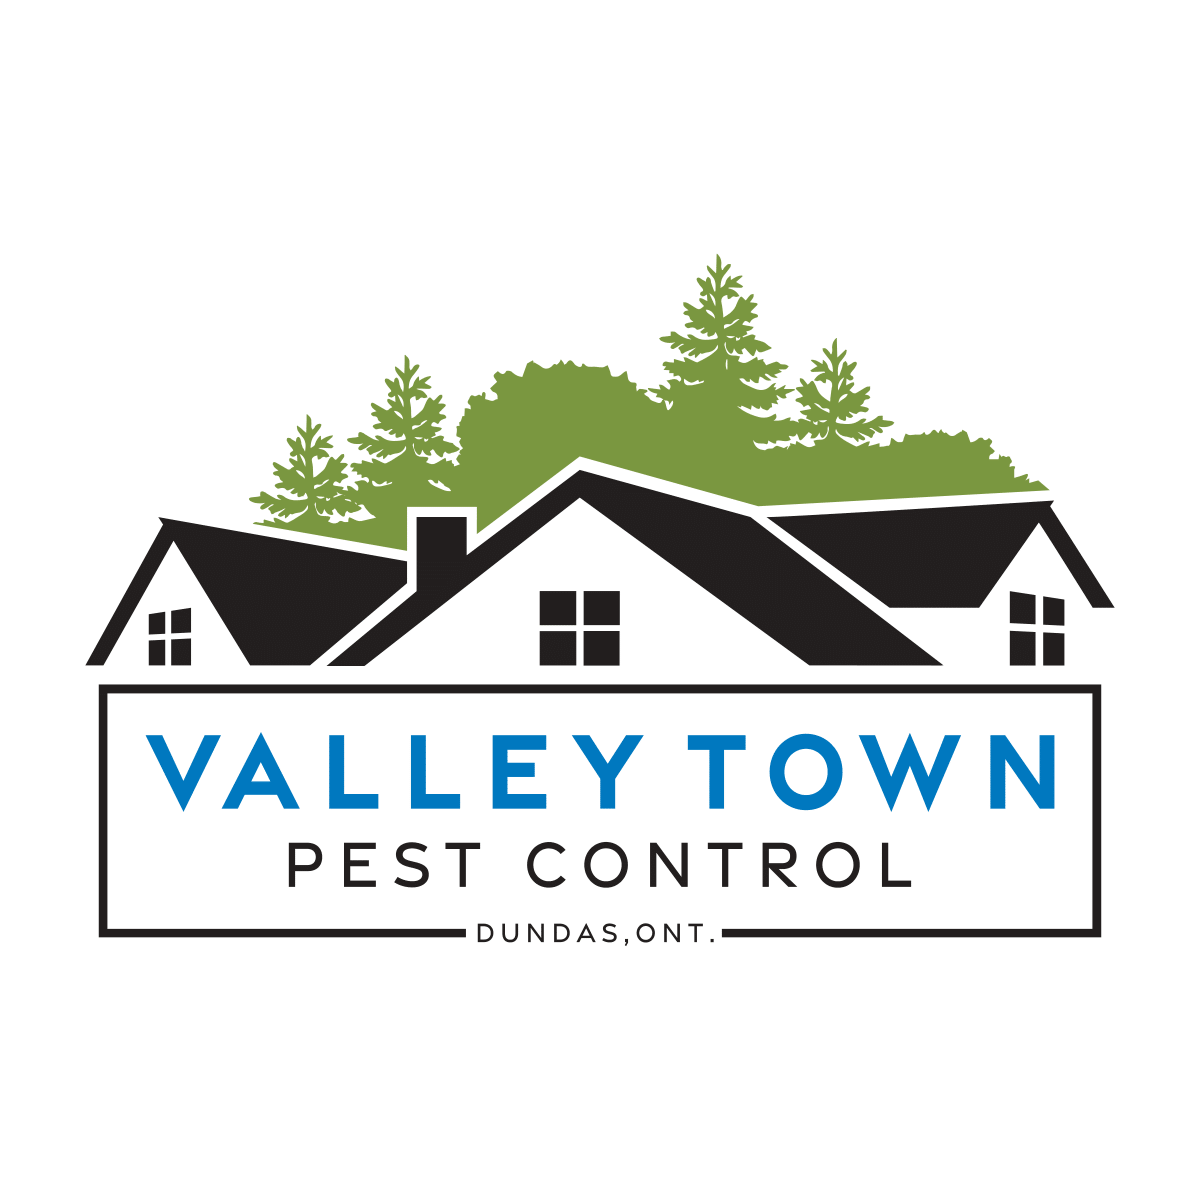 Valley Town Pest Control